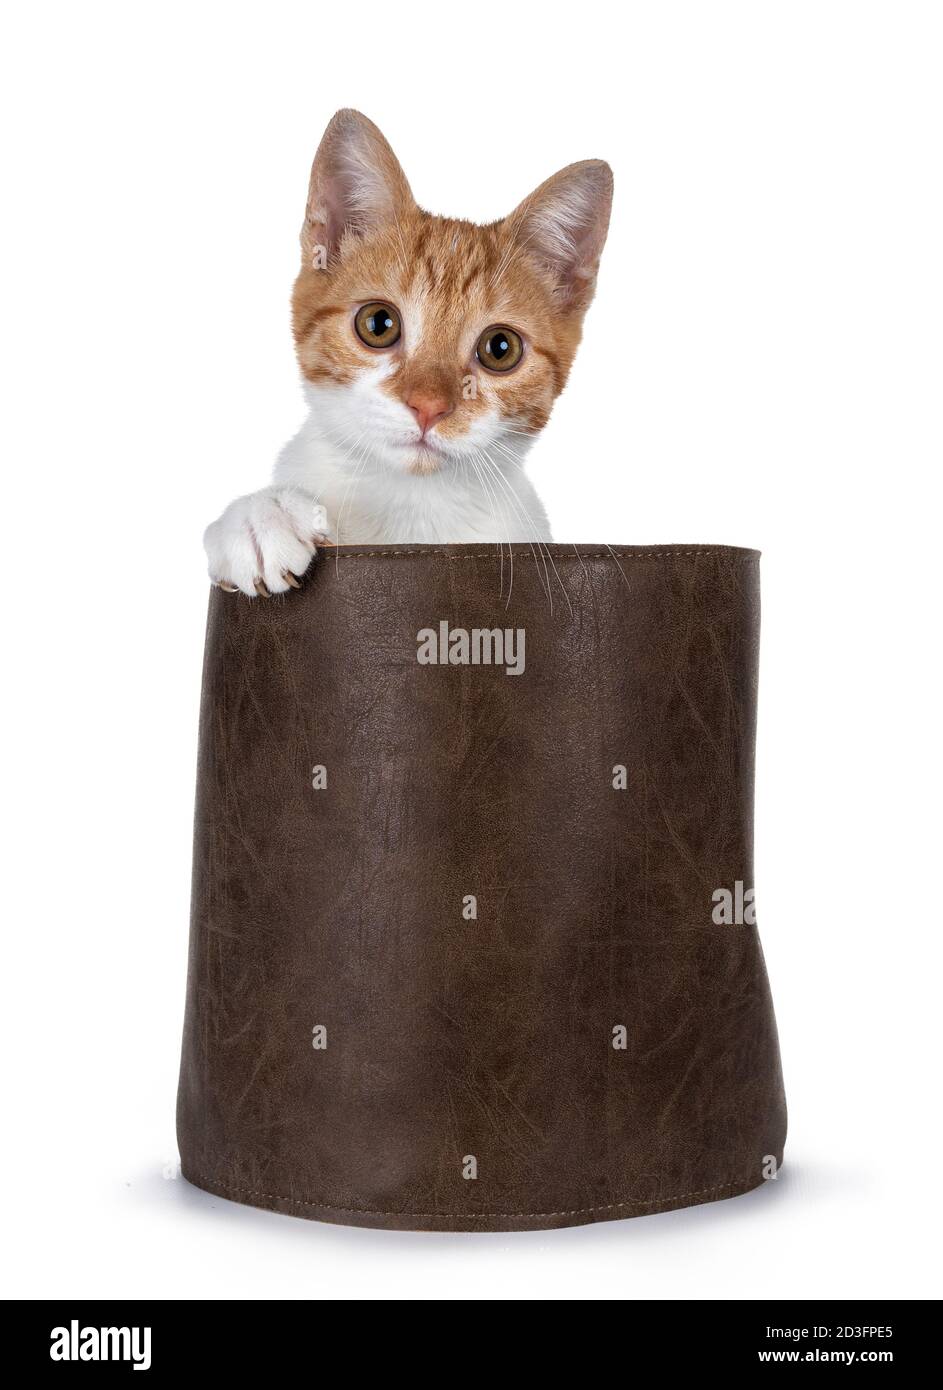 Cute young red with white non breed cat, sitting in brown leather basket. Looking towards camera with sweet brown eyes. Isolated on a white background Stock Photo